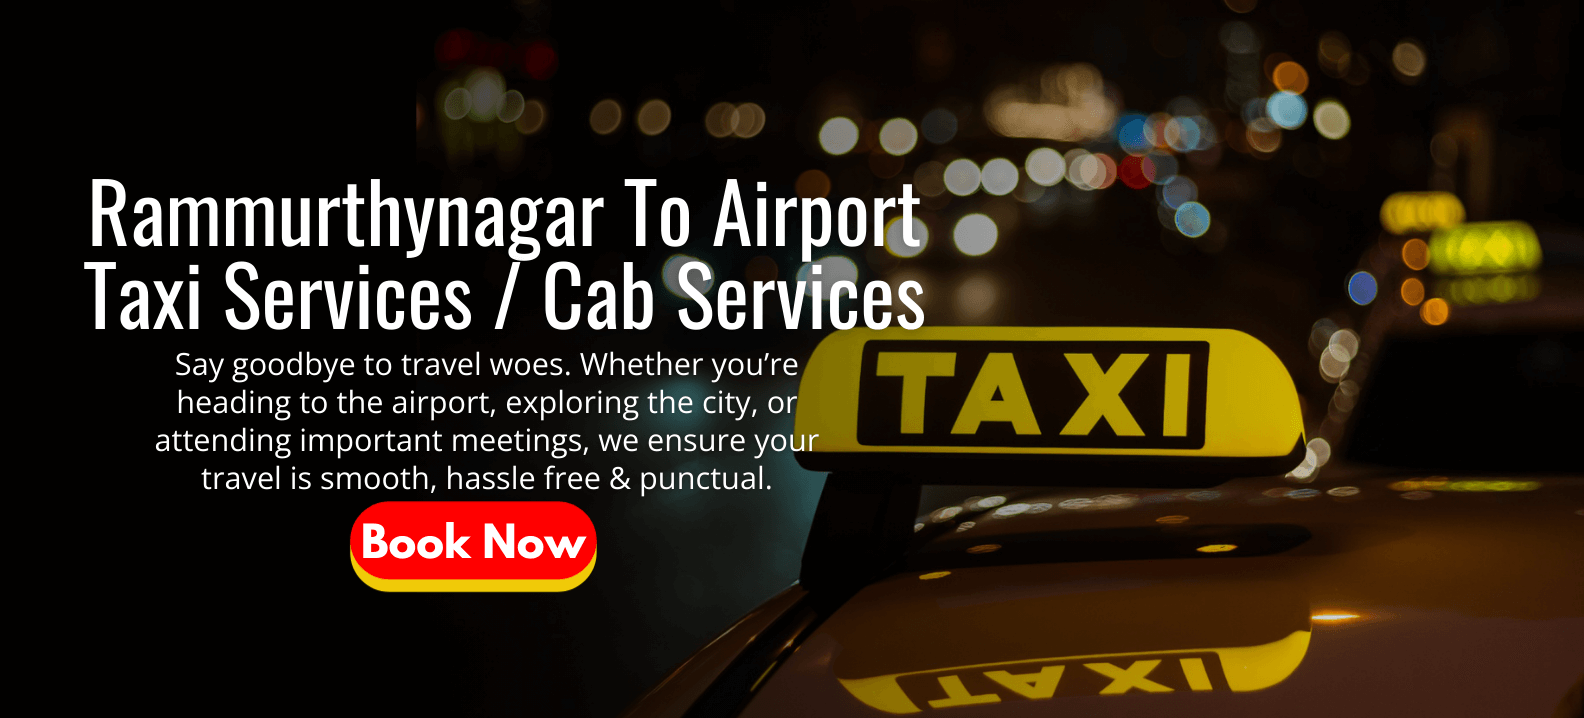 Ramamurthy Nagar to Airport Taxi Services | Cab Services